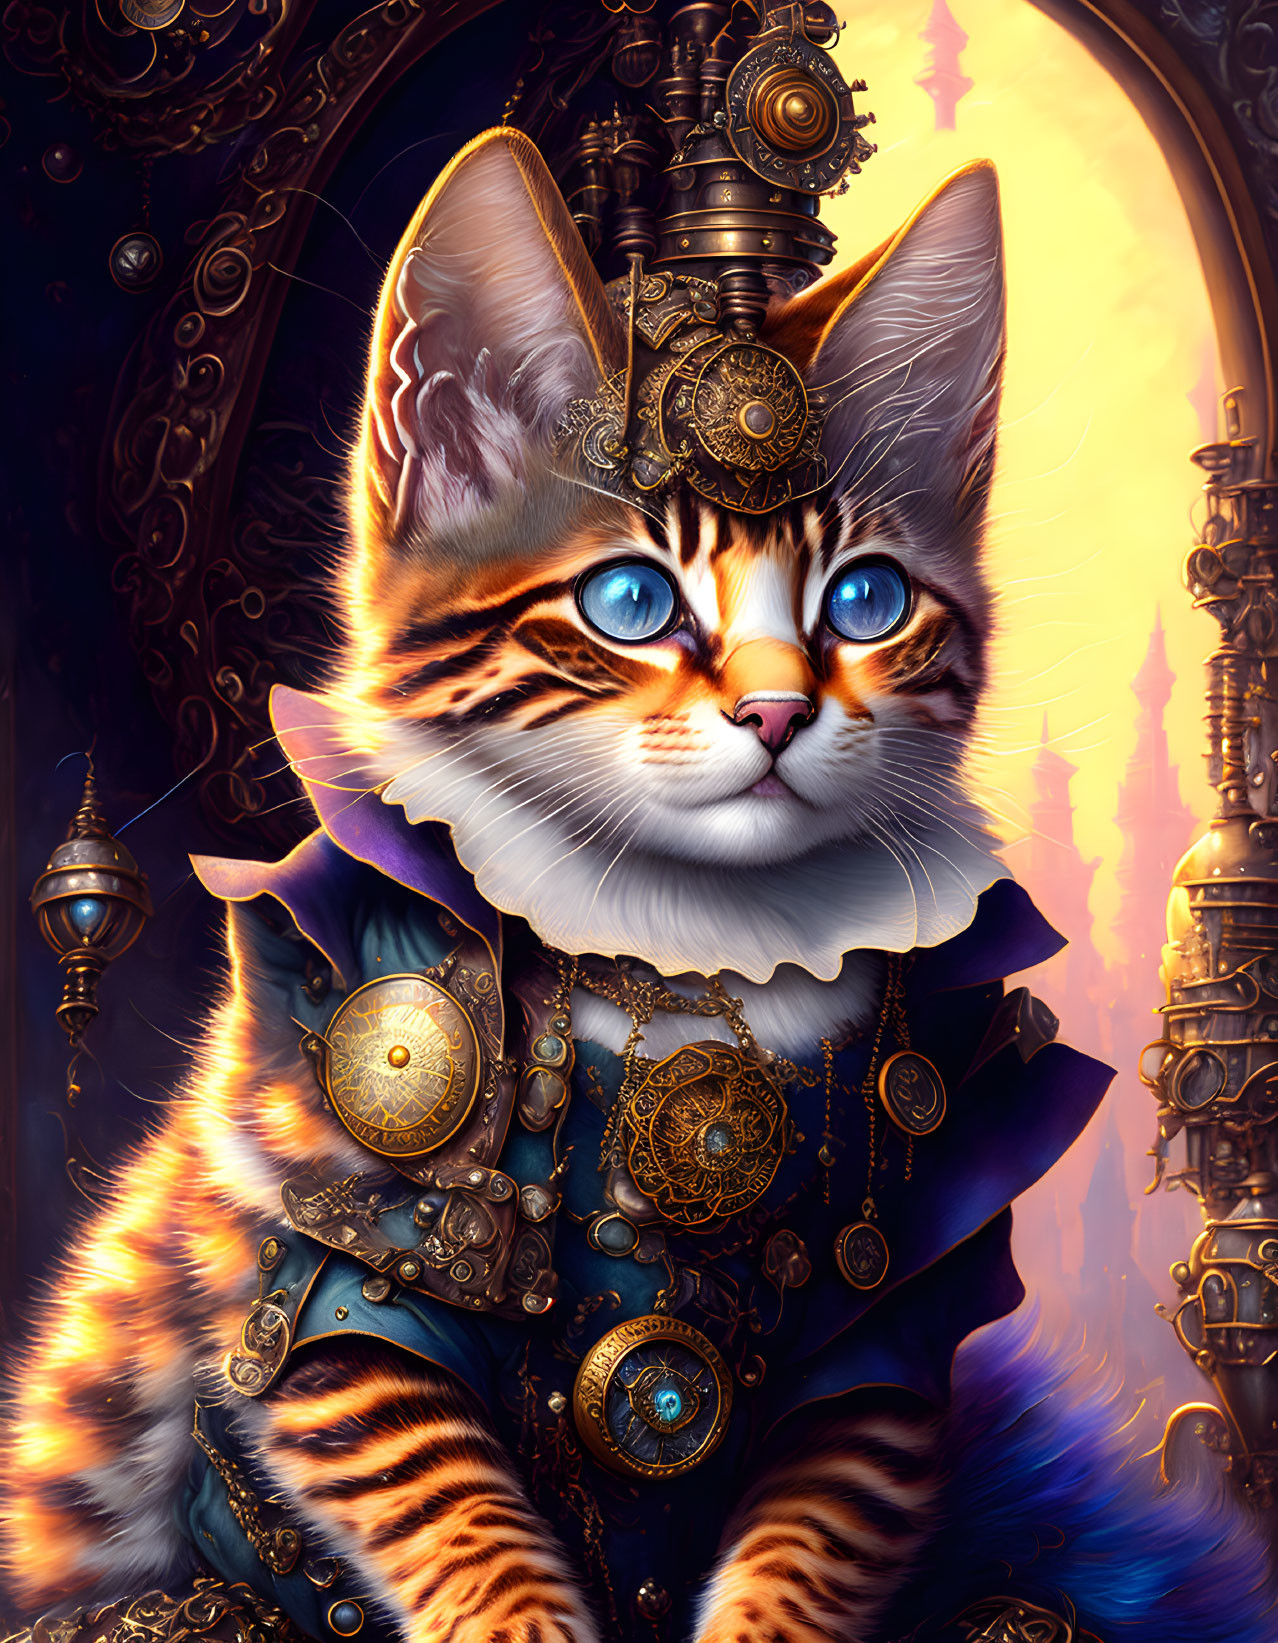 Steampunk-style illustrated cat in Victorian outfit with gears on golden backdrop